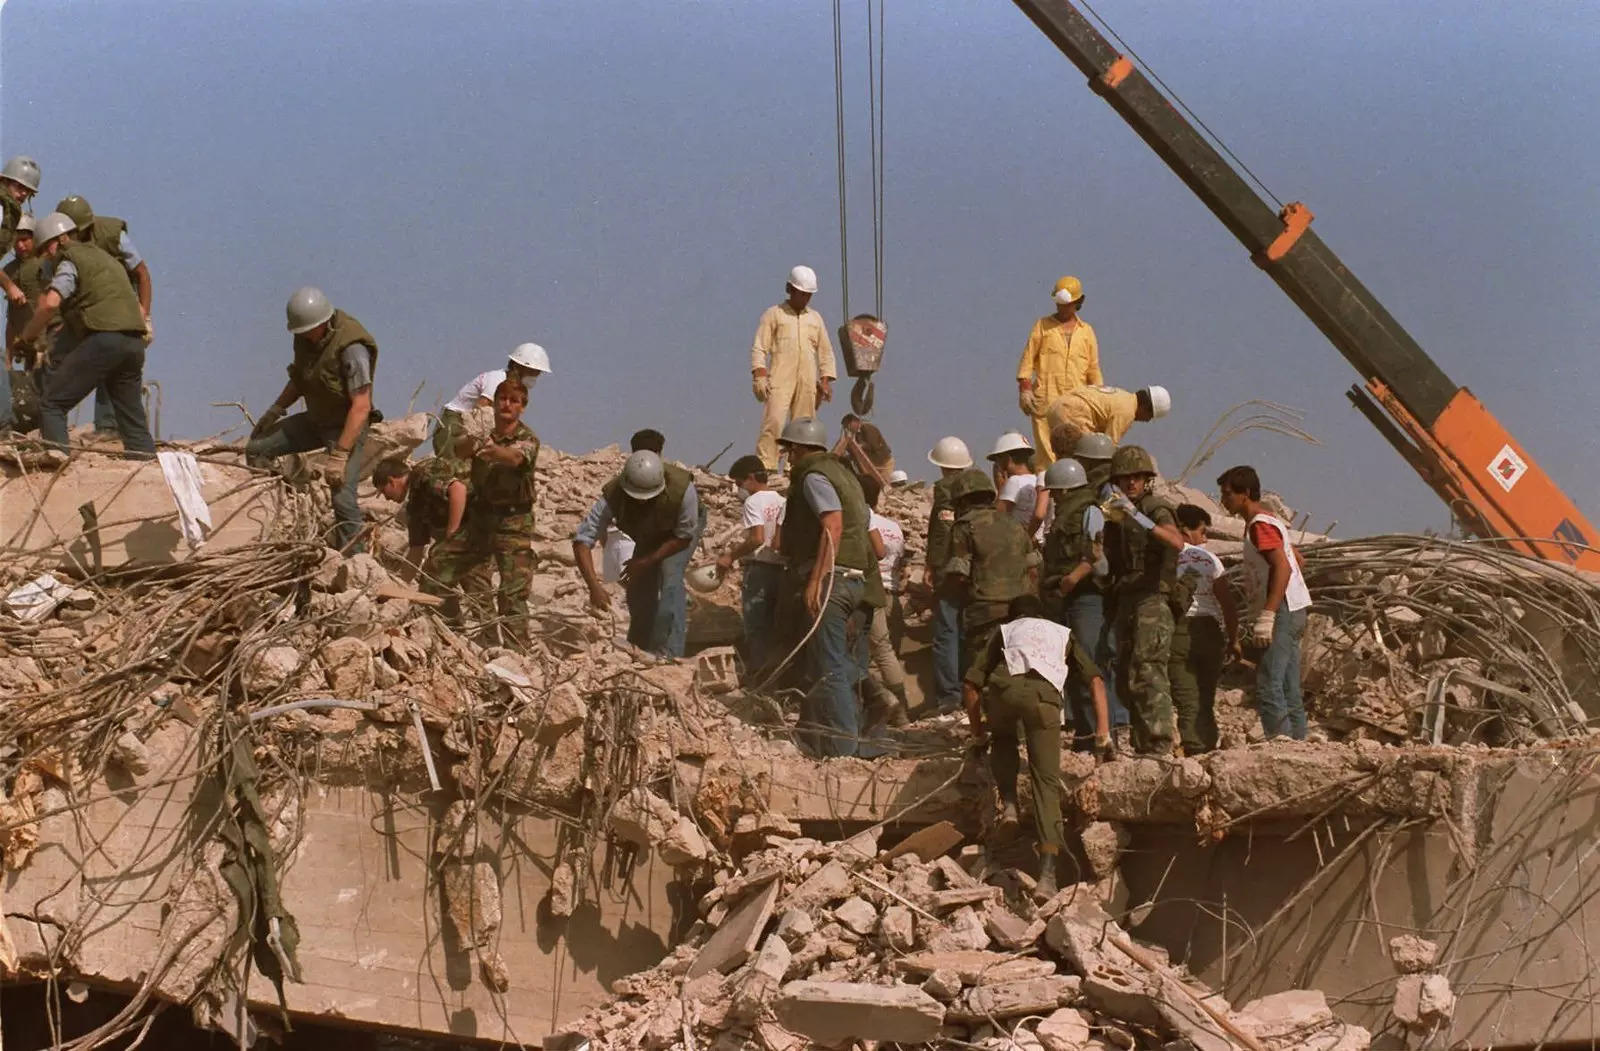 Rescue workers sift through the rubble of the US Marine base in Beirut on Oct0ber 23, 1983, following a massive bomb blast that destroyed the base and killed 241 American servicemen. Iran told the United Nation’s highest court on Monday that Washington’s confiscation of some $2 billion in assets from Iranian state bank accounts to compensate bombing victims was an attempt to destabilize the Iranian government and a violation of international law. (File photo: AP)